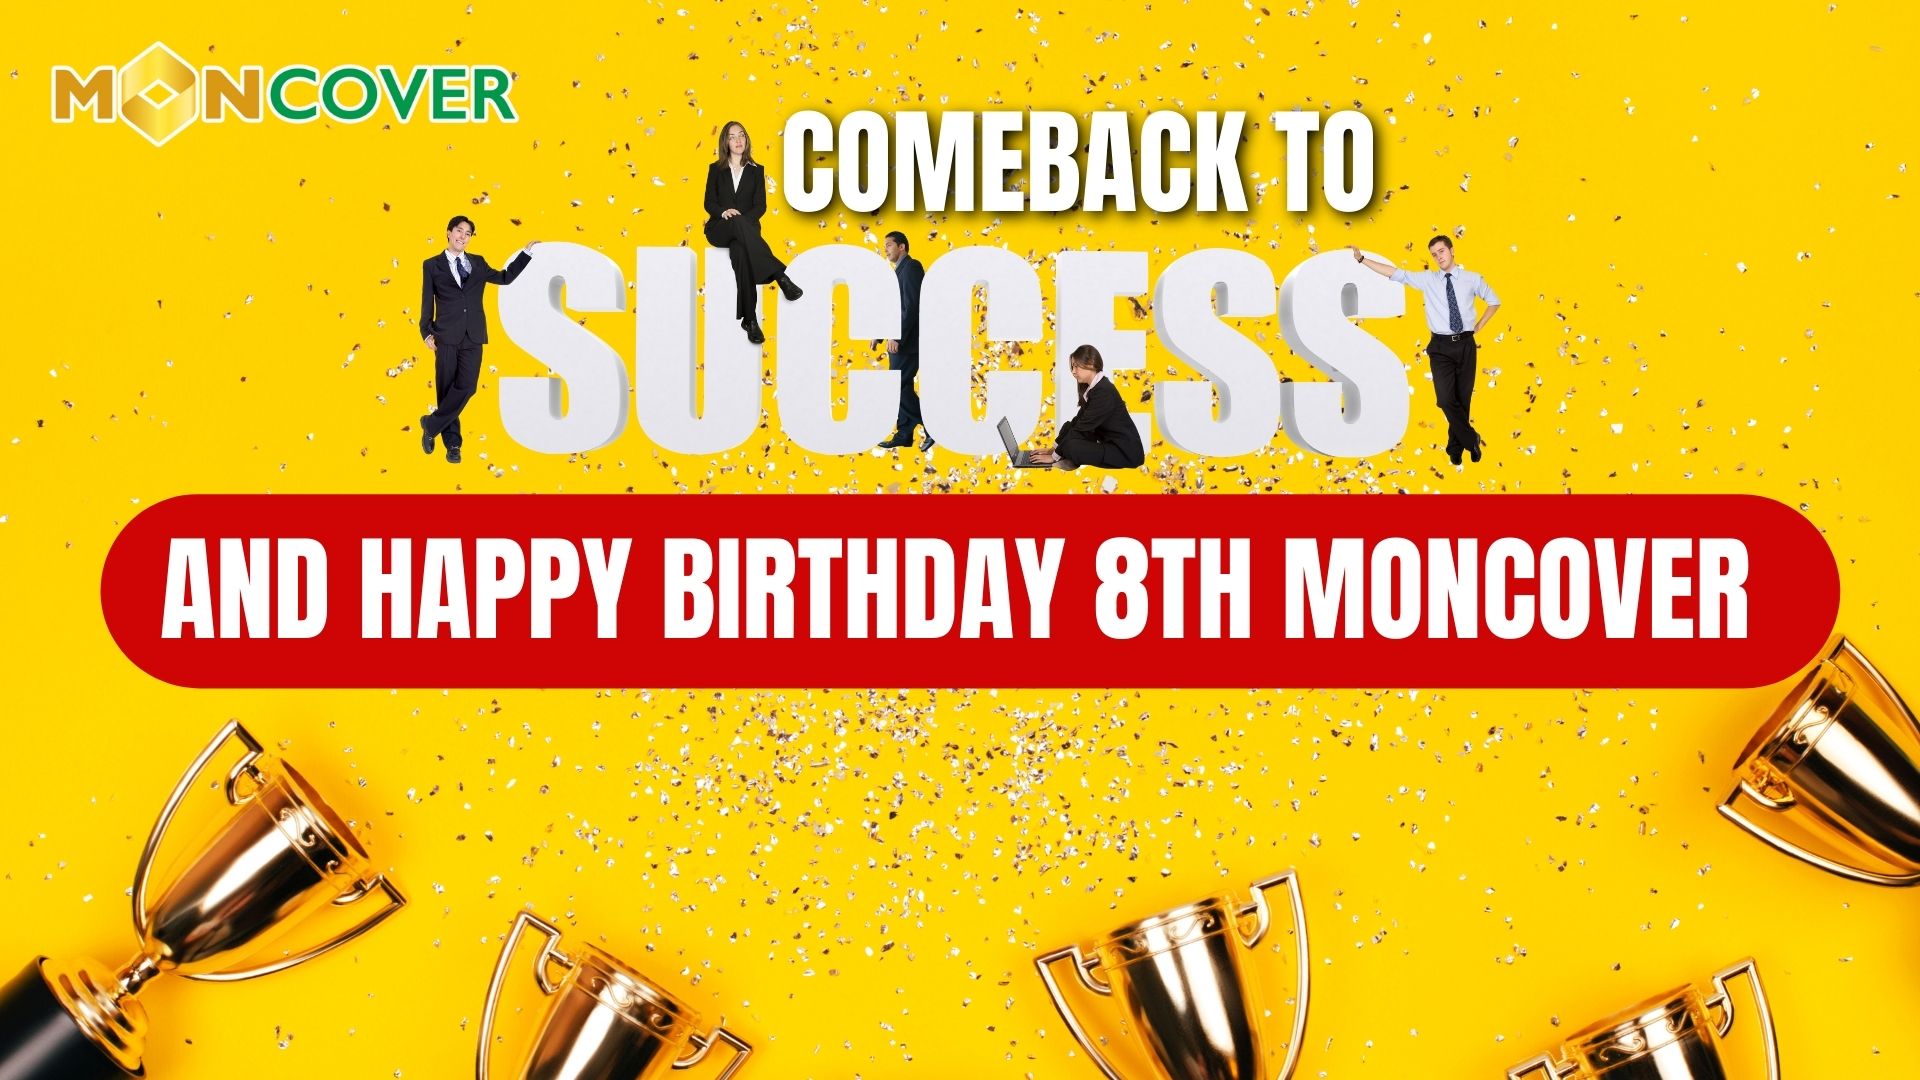 Comeback to Success and Happy birthday 8th Moncover